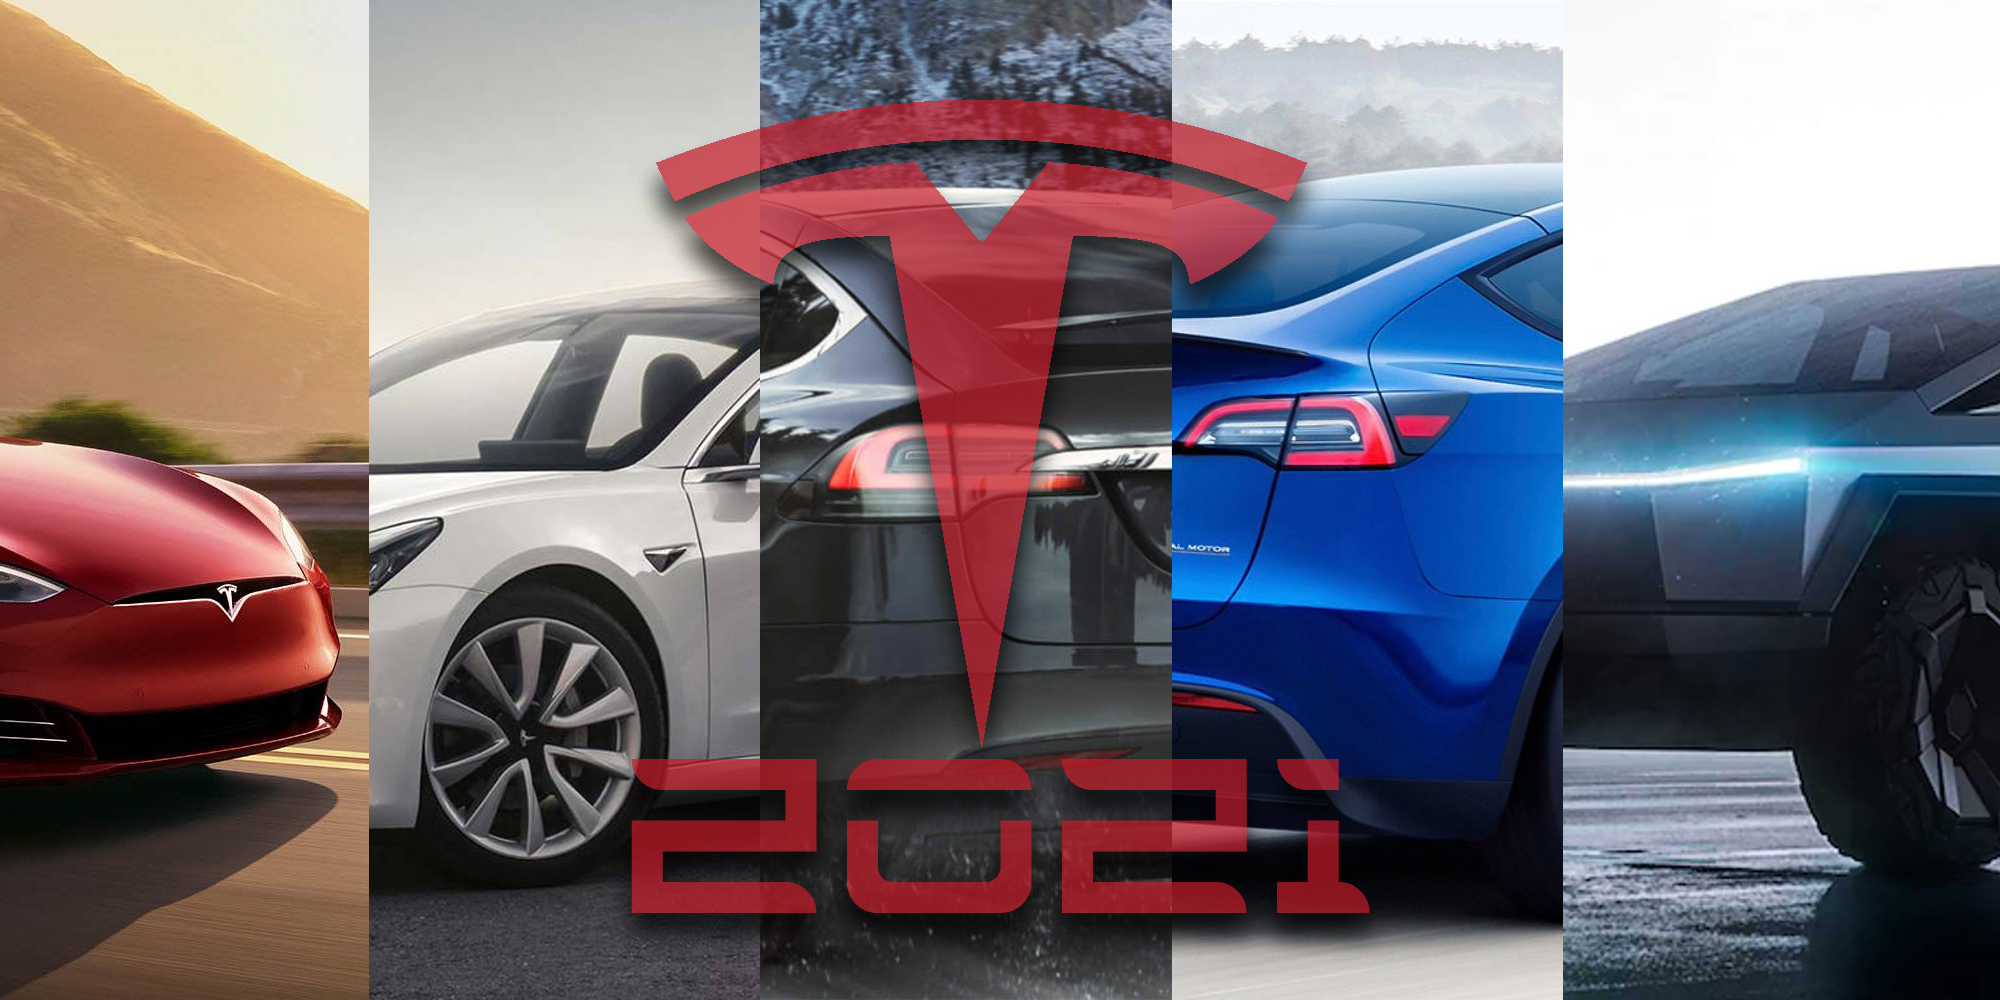 Tesla 2021: Everything we know about the latest Model 3 & more